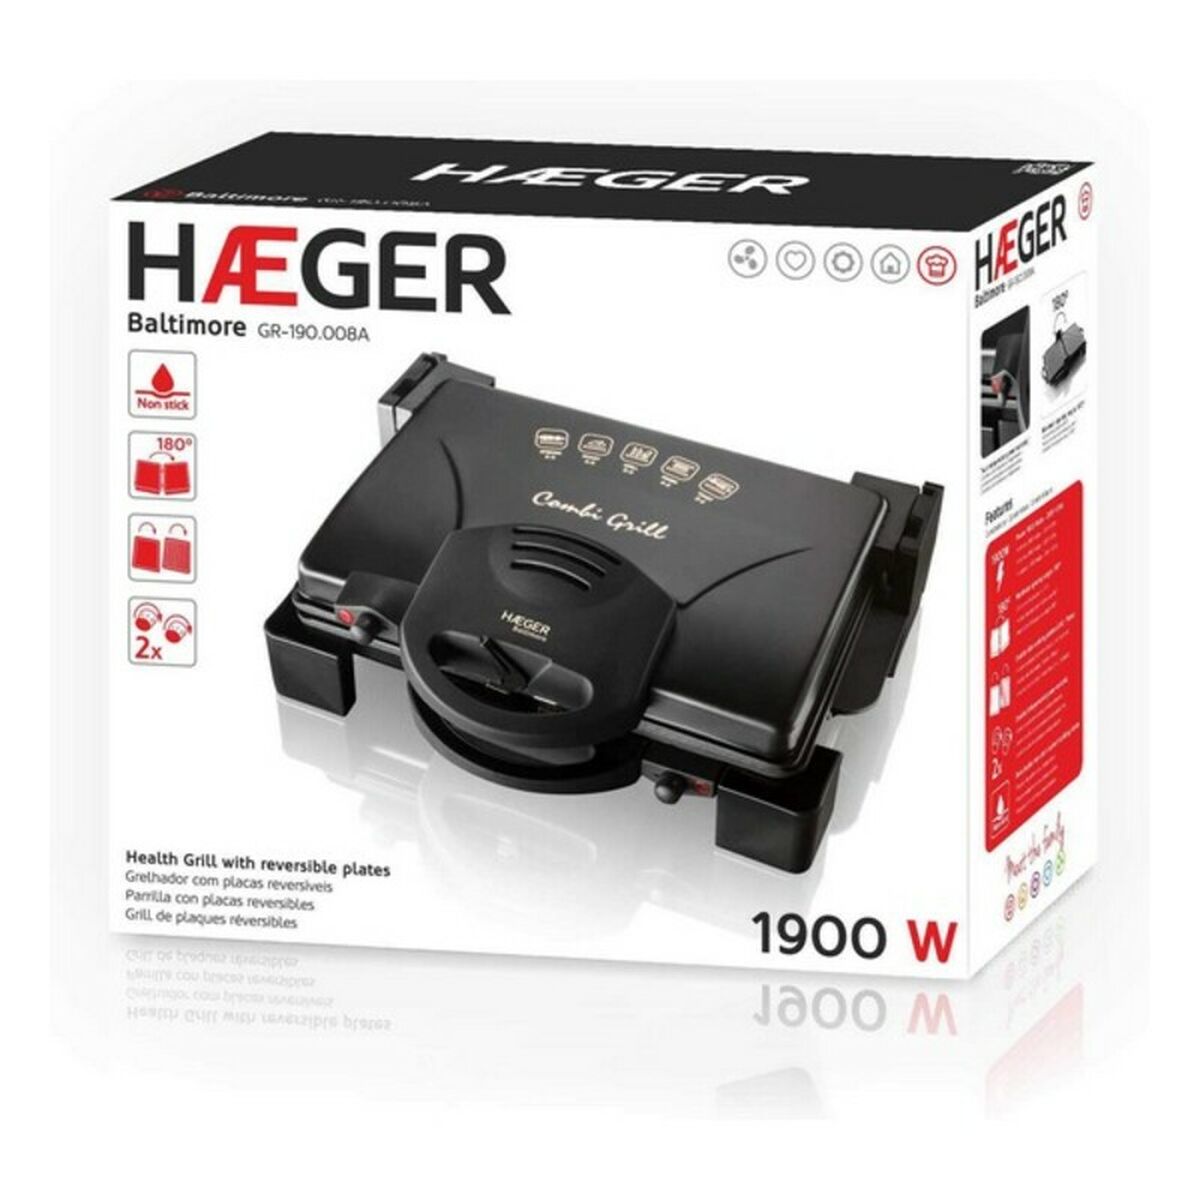 Grill Haeger GR-190.008A 1900W Black Stainless steel